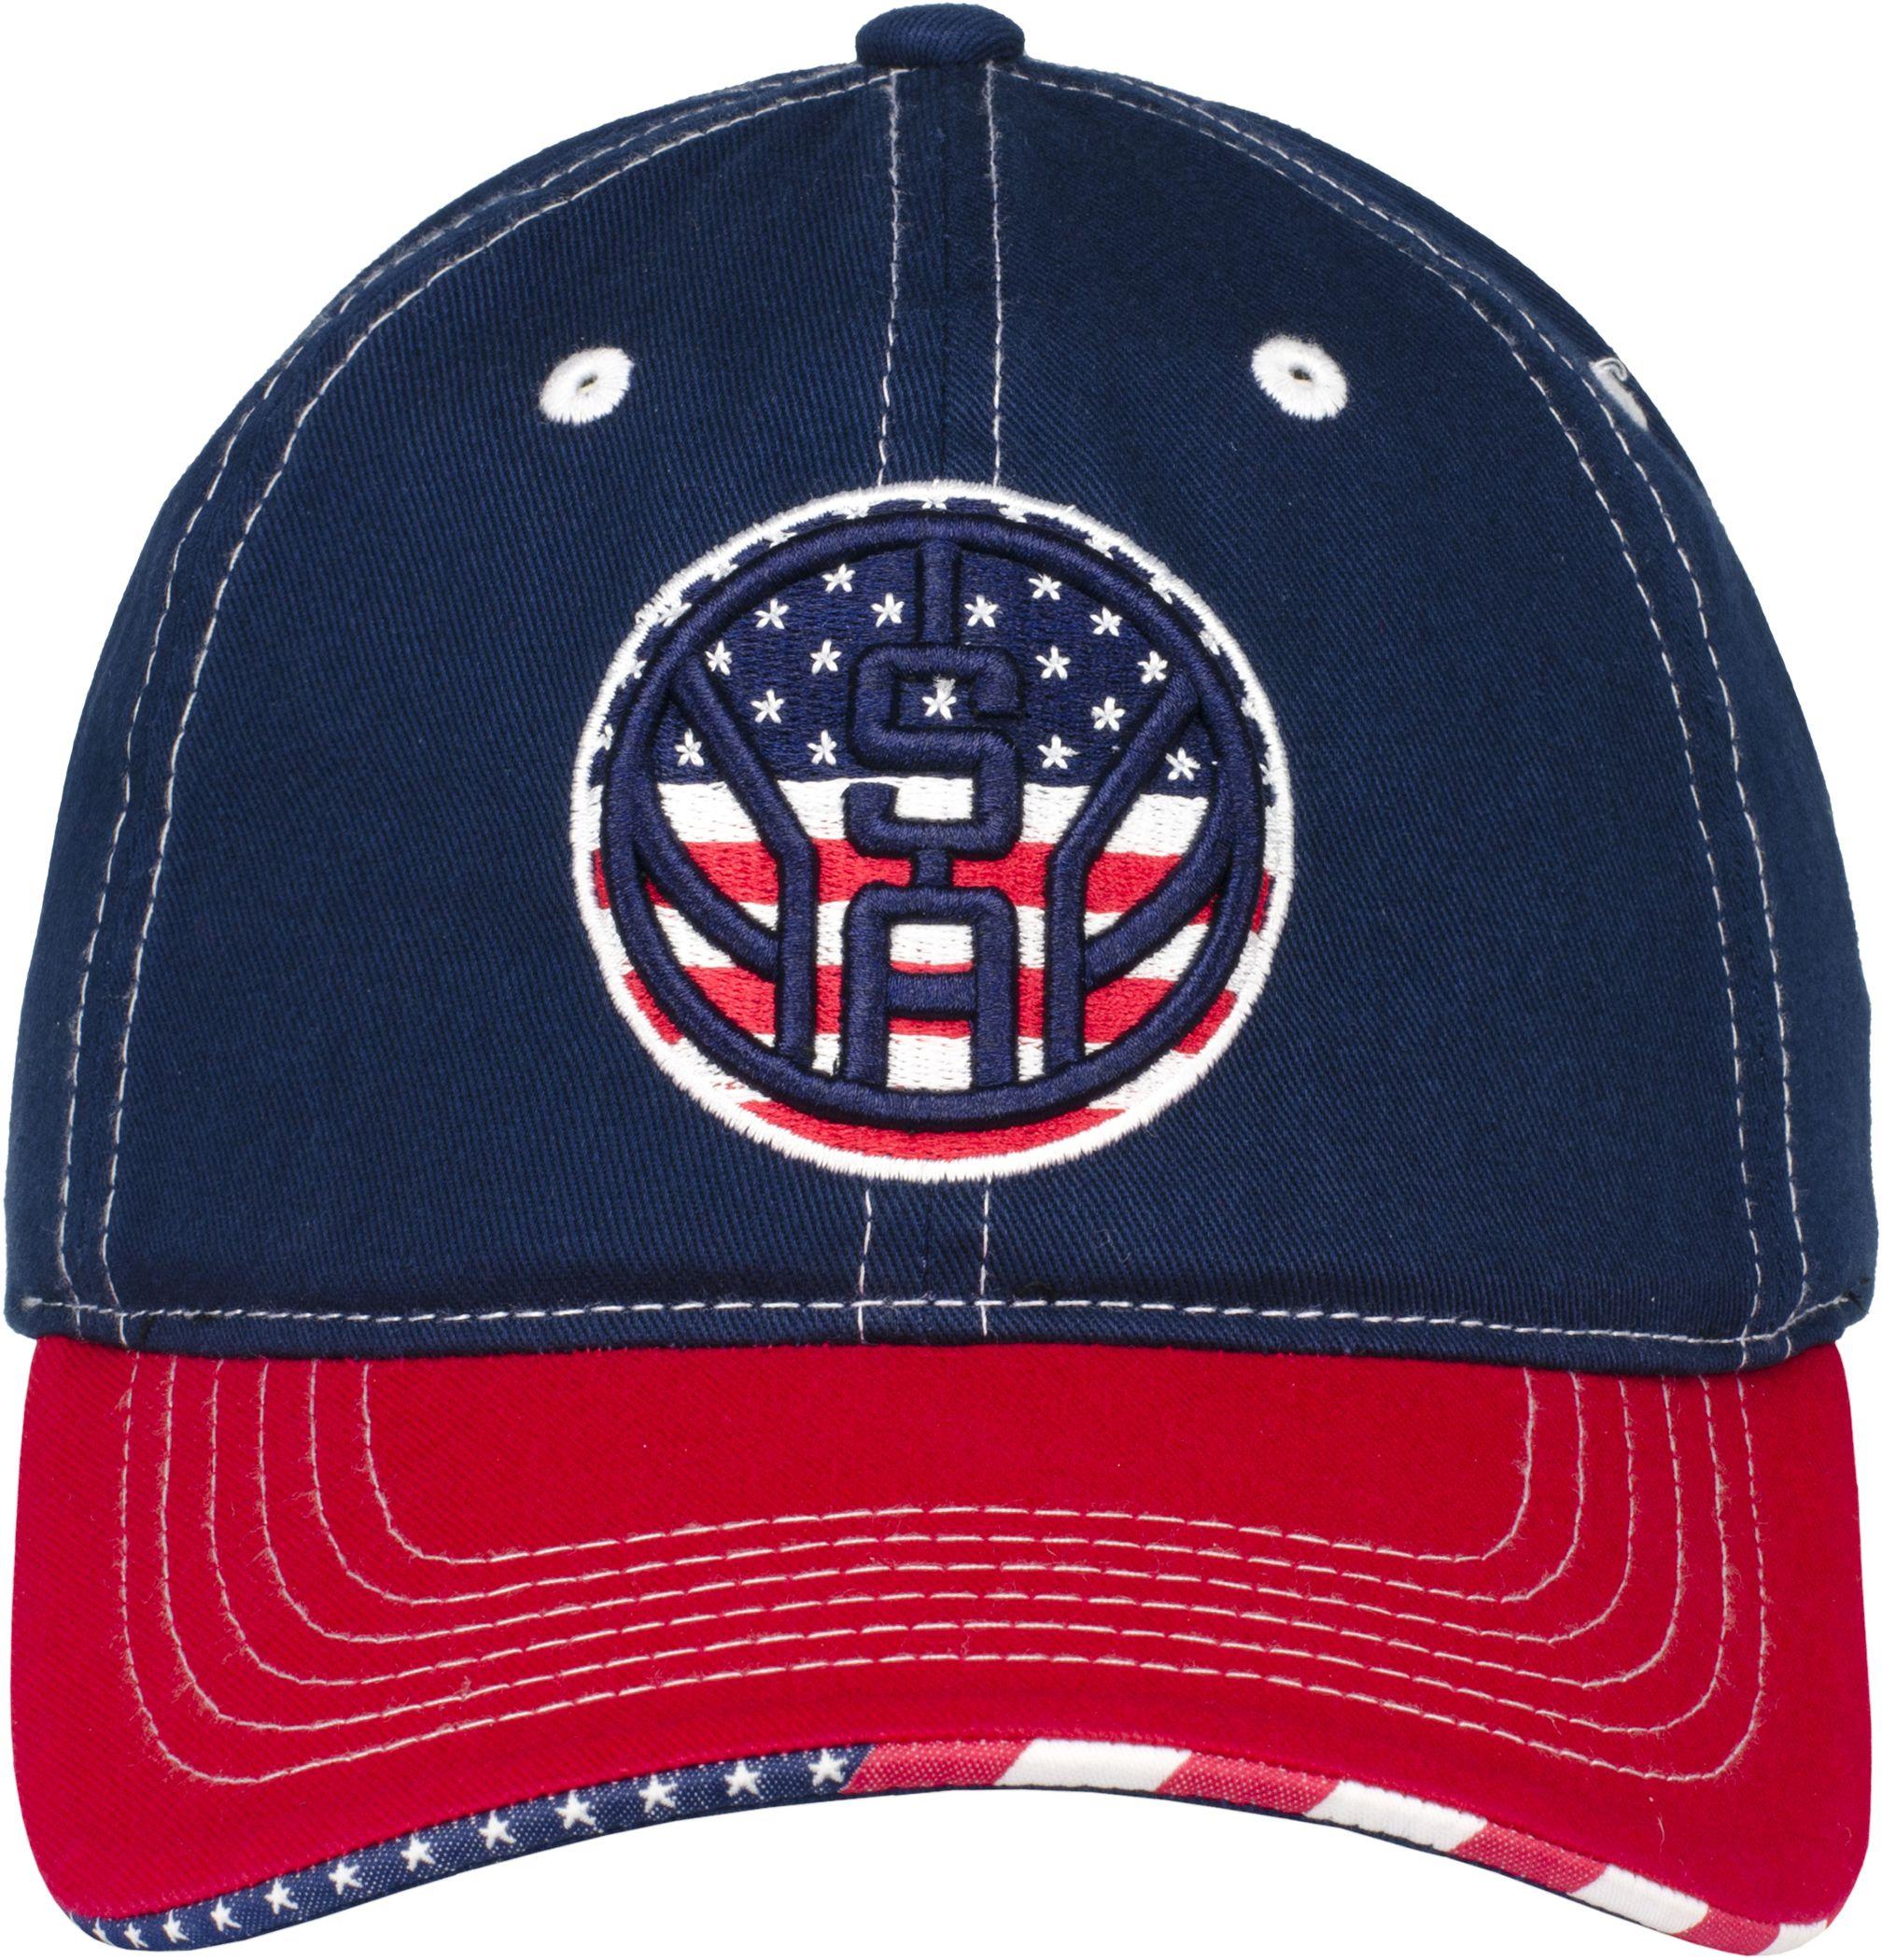 Red White and Blue Basketball Logo - San Antonio Spurs Item Of The Game Hat - Red White and Blue SAS ...